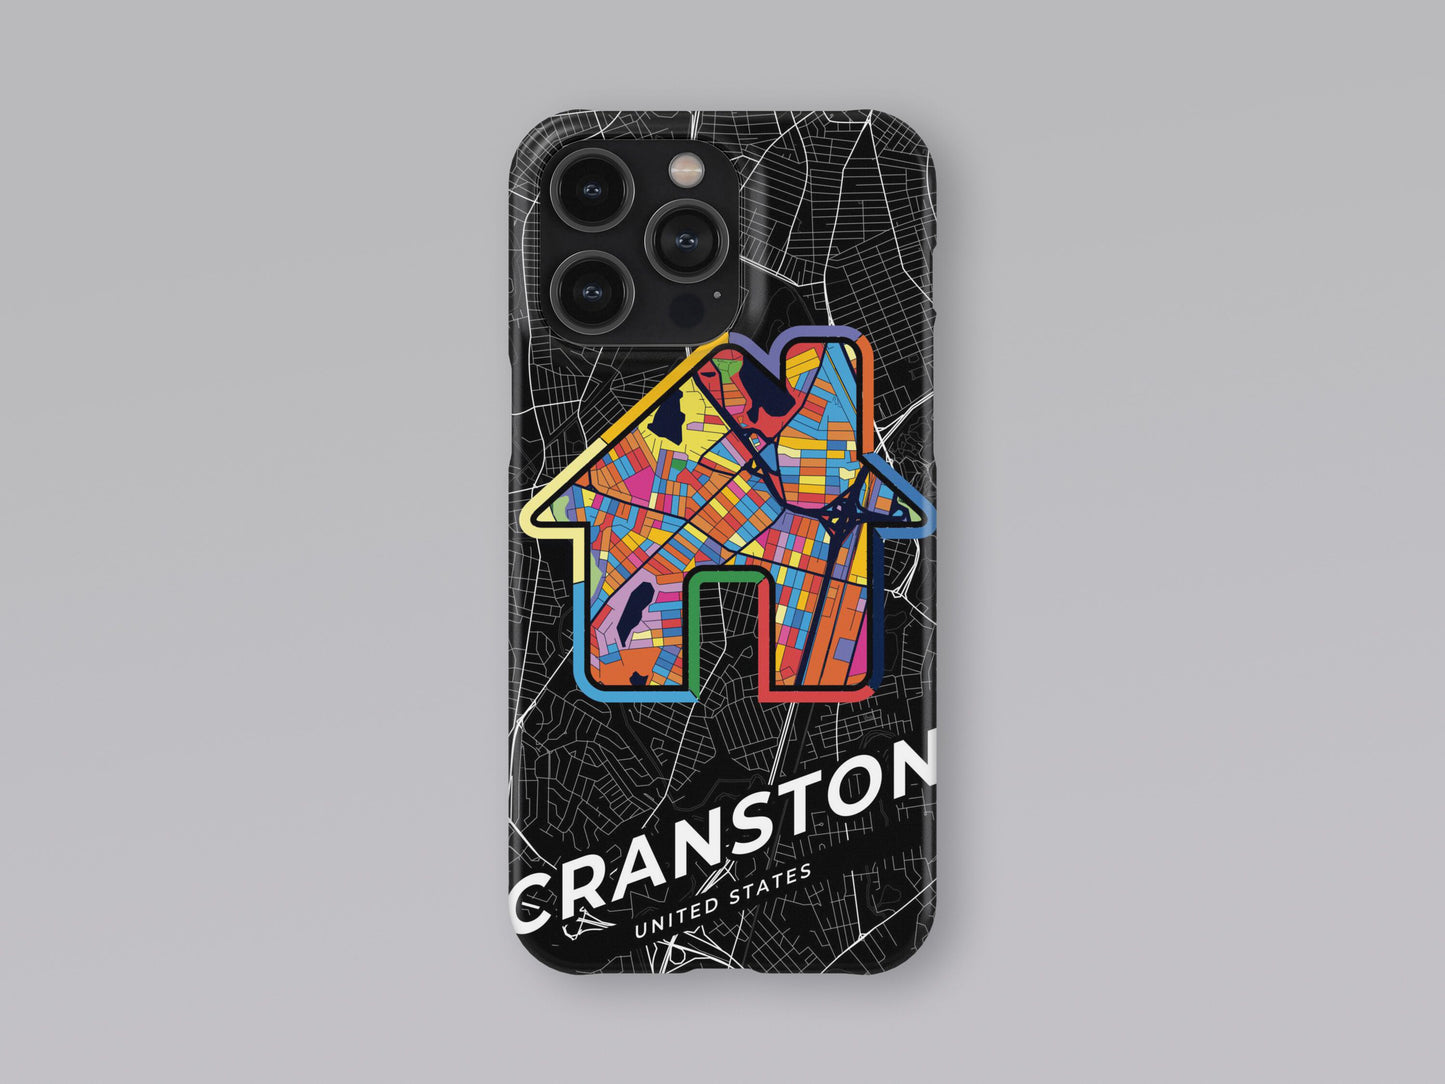 Cranston Rhode Island slim phone case with colorful icon. Birthday, wedding or housewarming gift. Couple match cases. 3